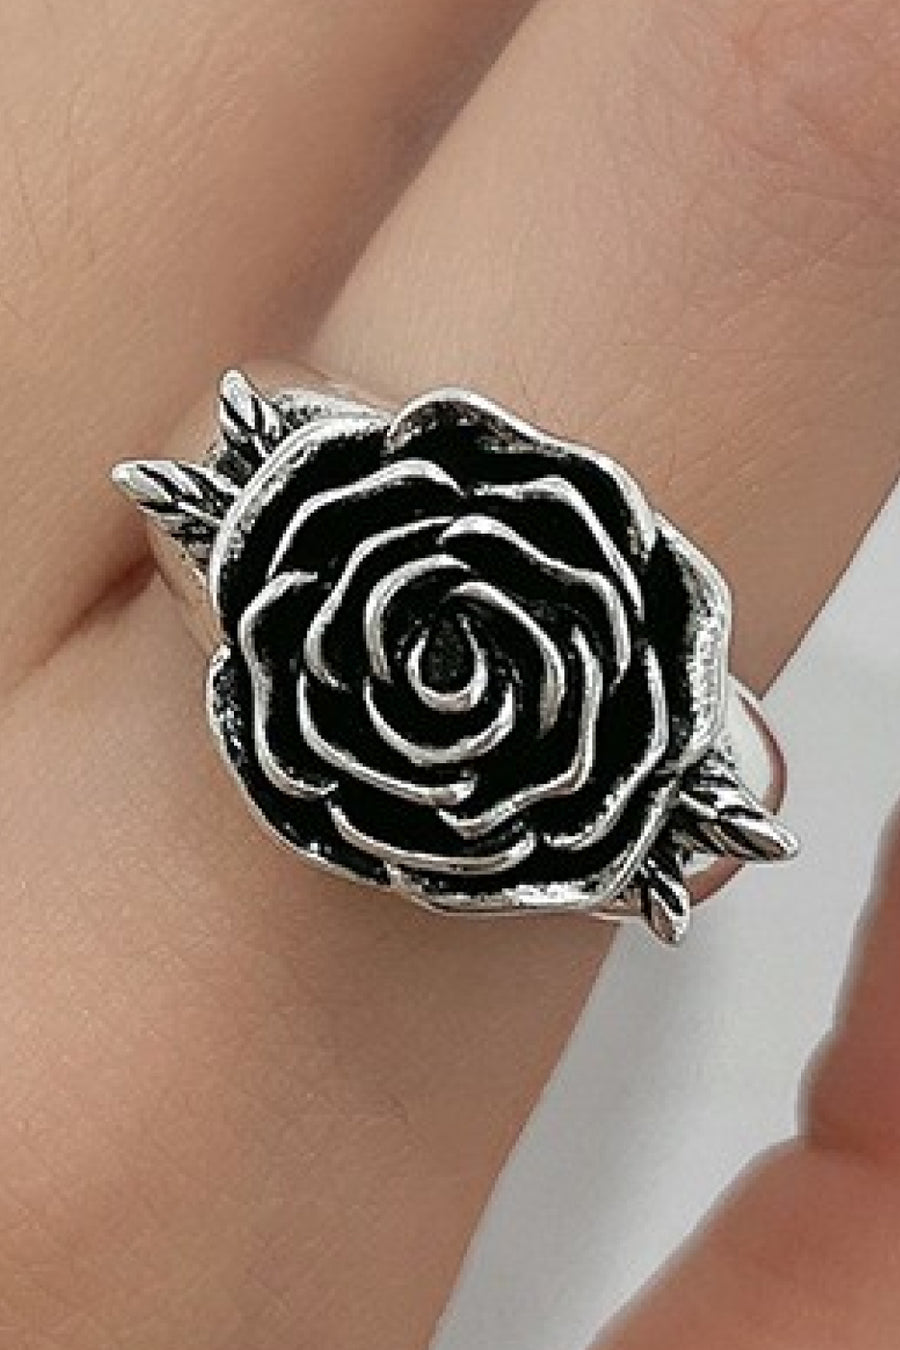 Rose 18K Silver-Plated Ring